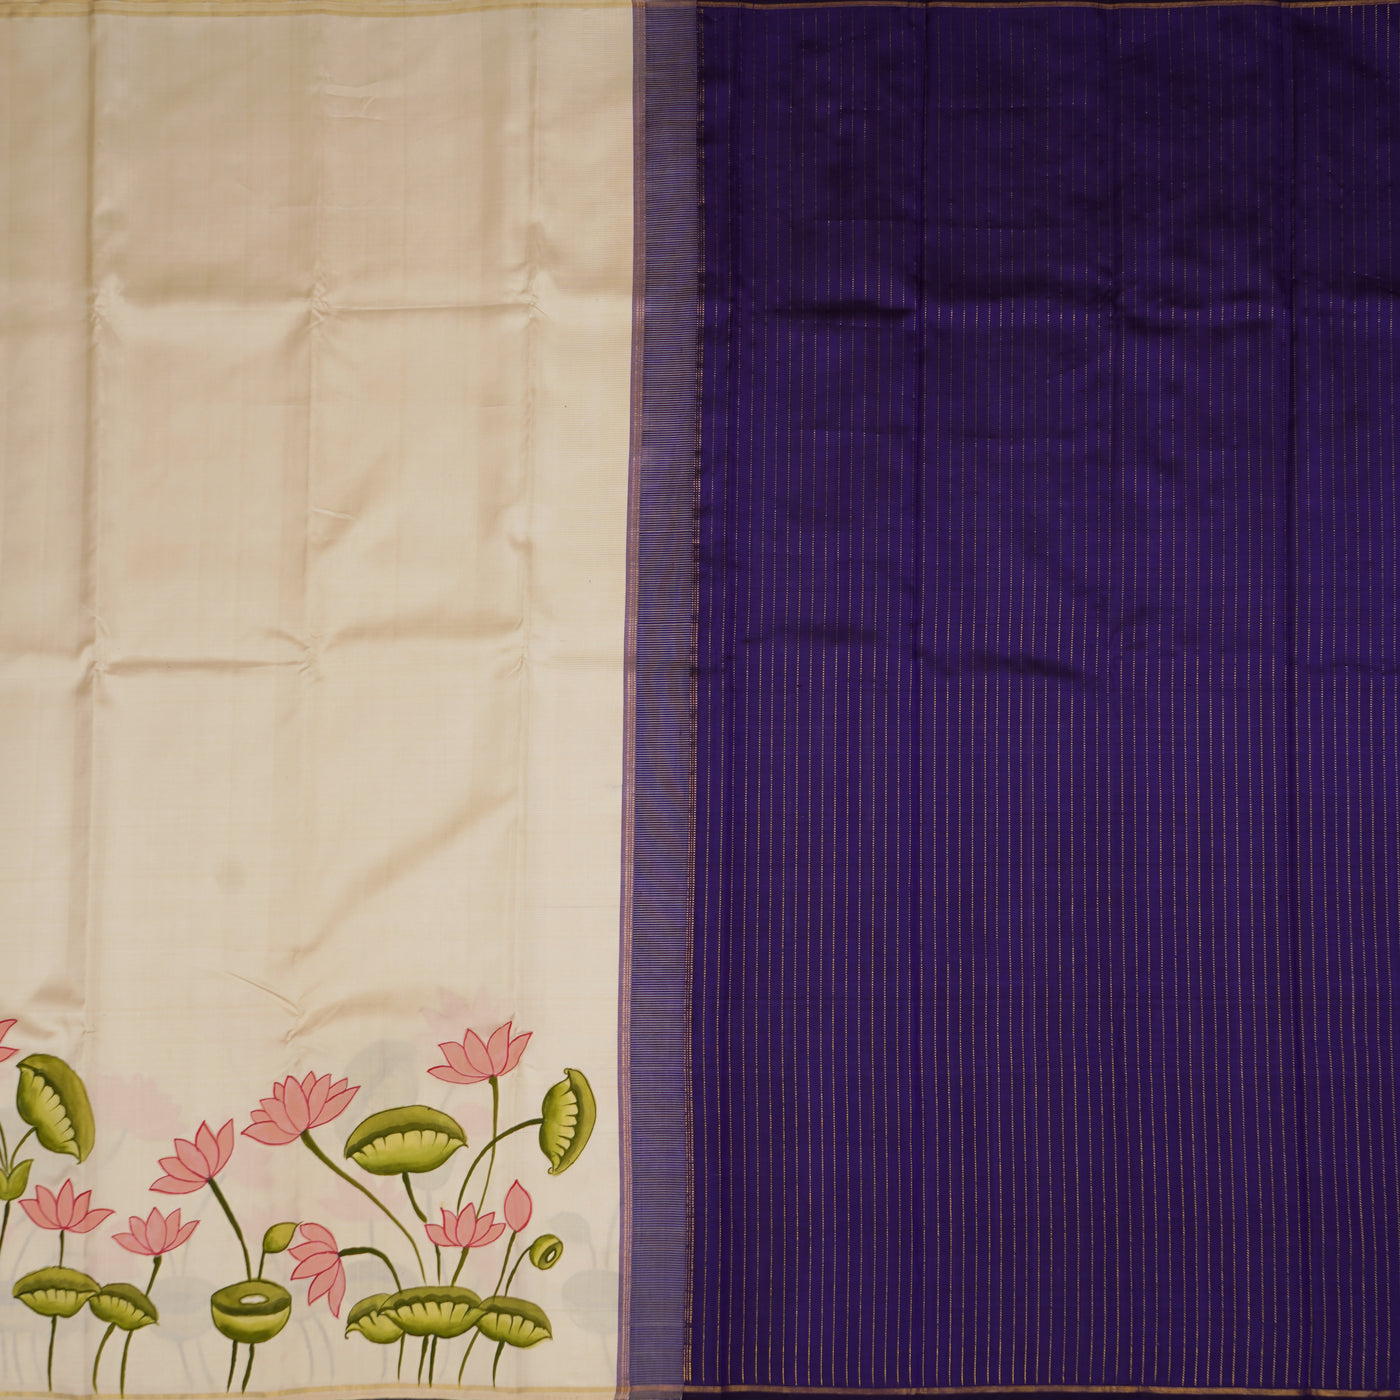 Off White Hand Painted Kanchi Silk Saree with Lotus Design